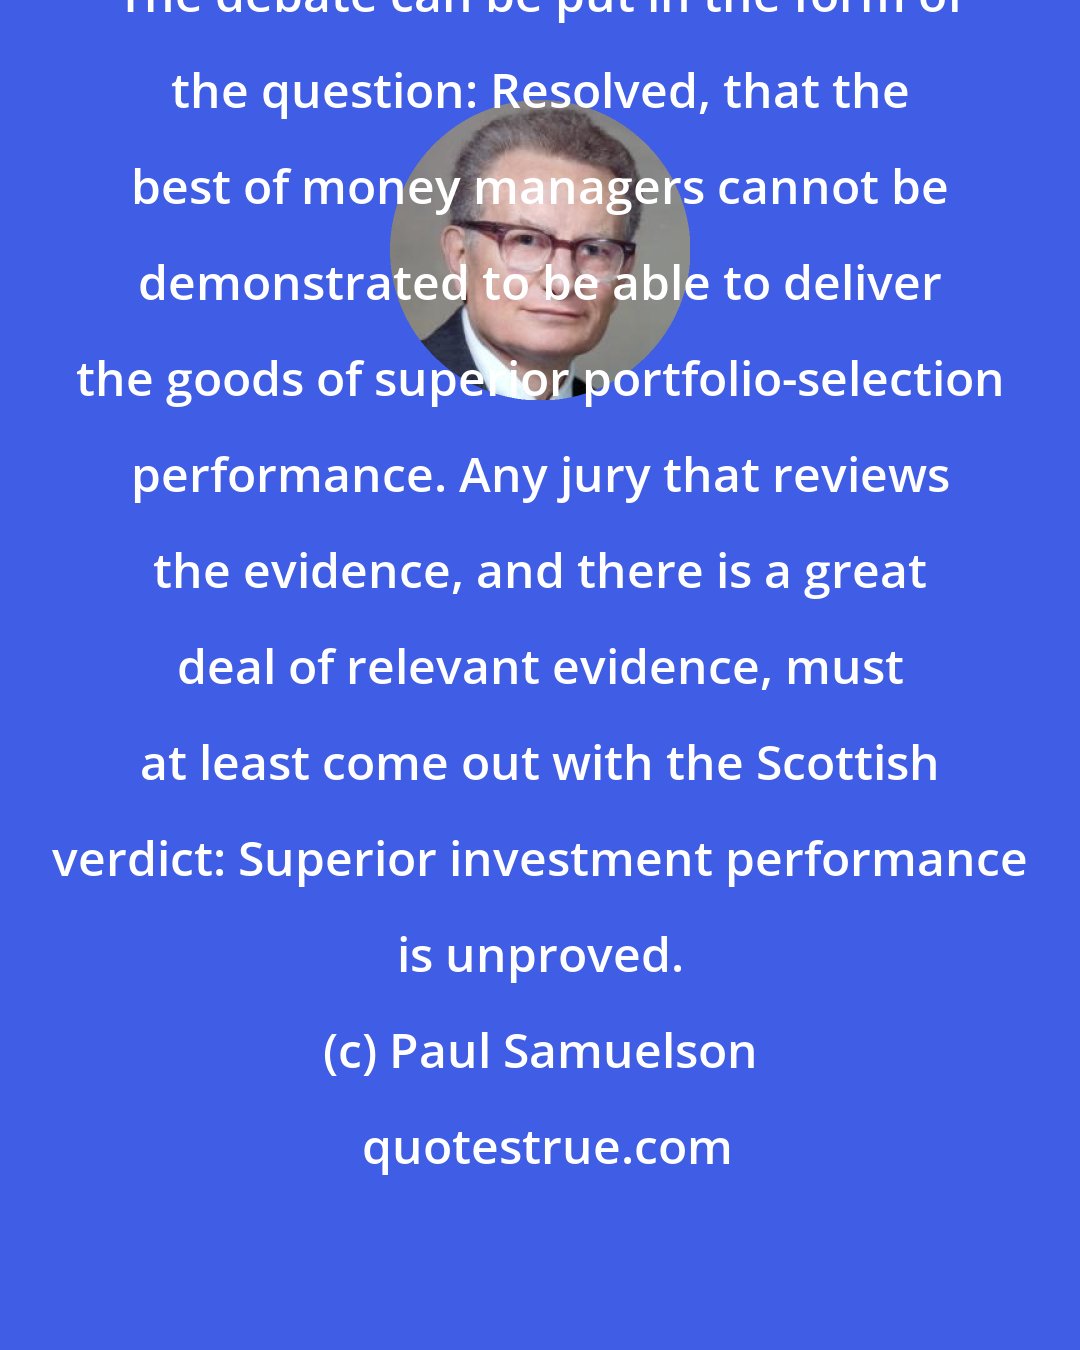 Paul Samuelson: The debate can be put in the form of the question: Resolved, that the best of money managers cannot be demonstrated to be able to deliver the goods of superior portfolio-selection performance. Any jury that reviews the evidence, and there is a great deal of relevant evidence, must at least come out with the Scottish verdict: Superior investment performance is unproved.